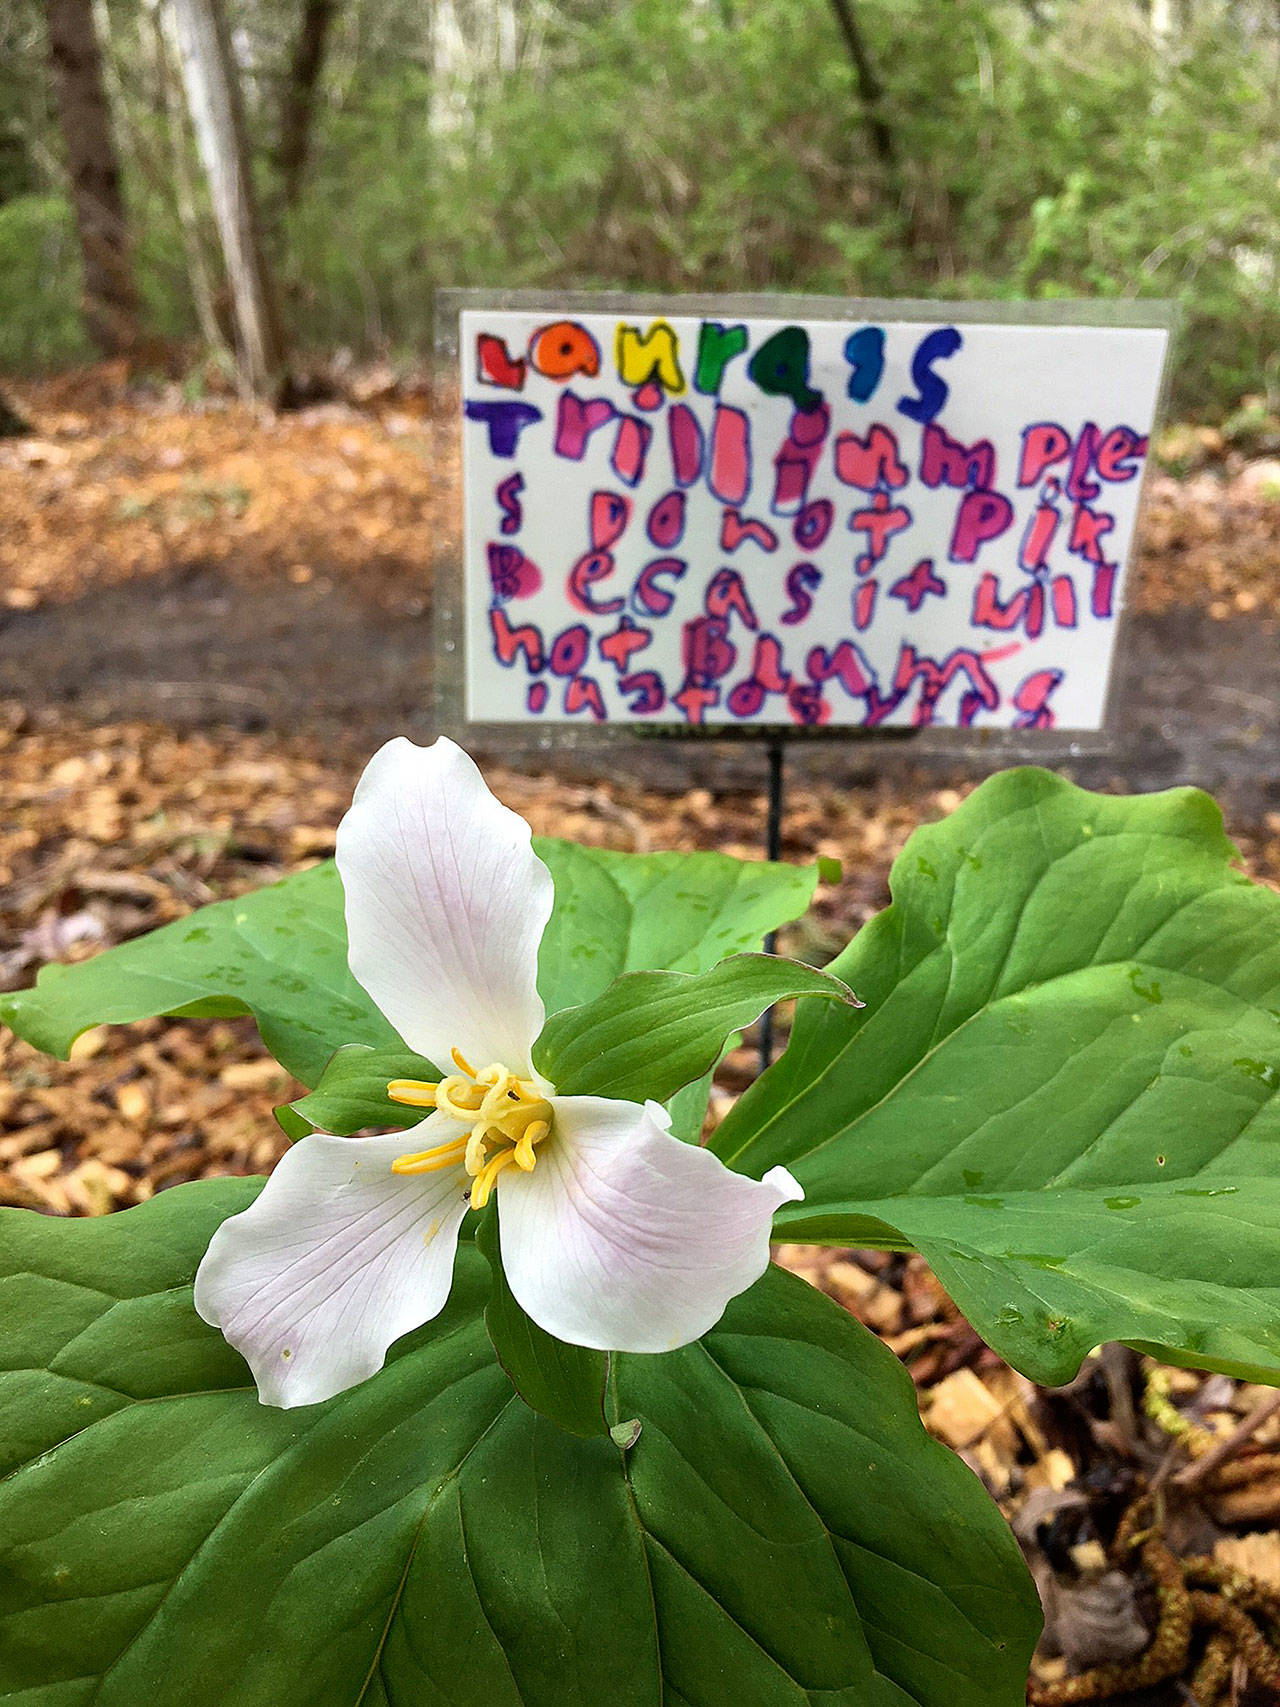 Laura Drake adopted these trillium plants for their protection. Photo courtesy of Linda Anchondo